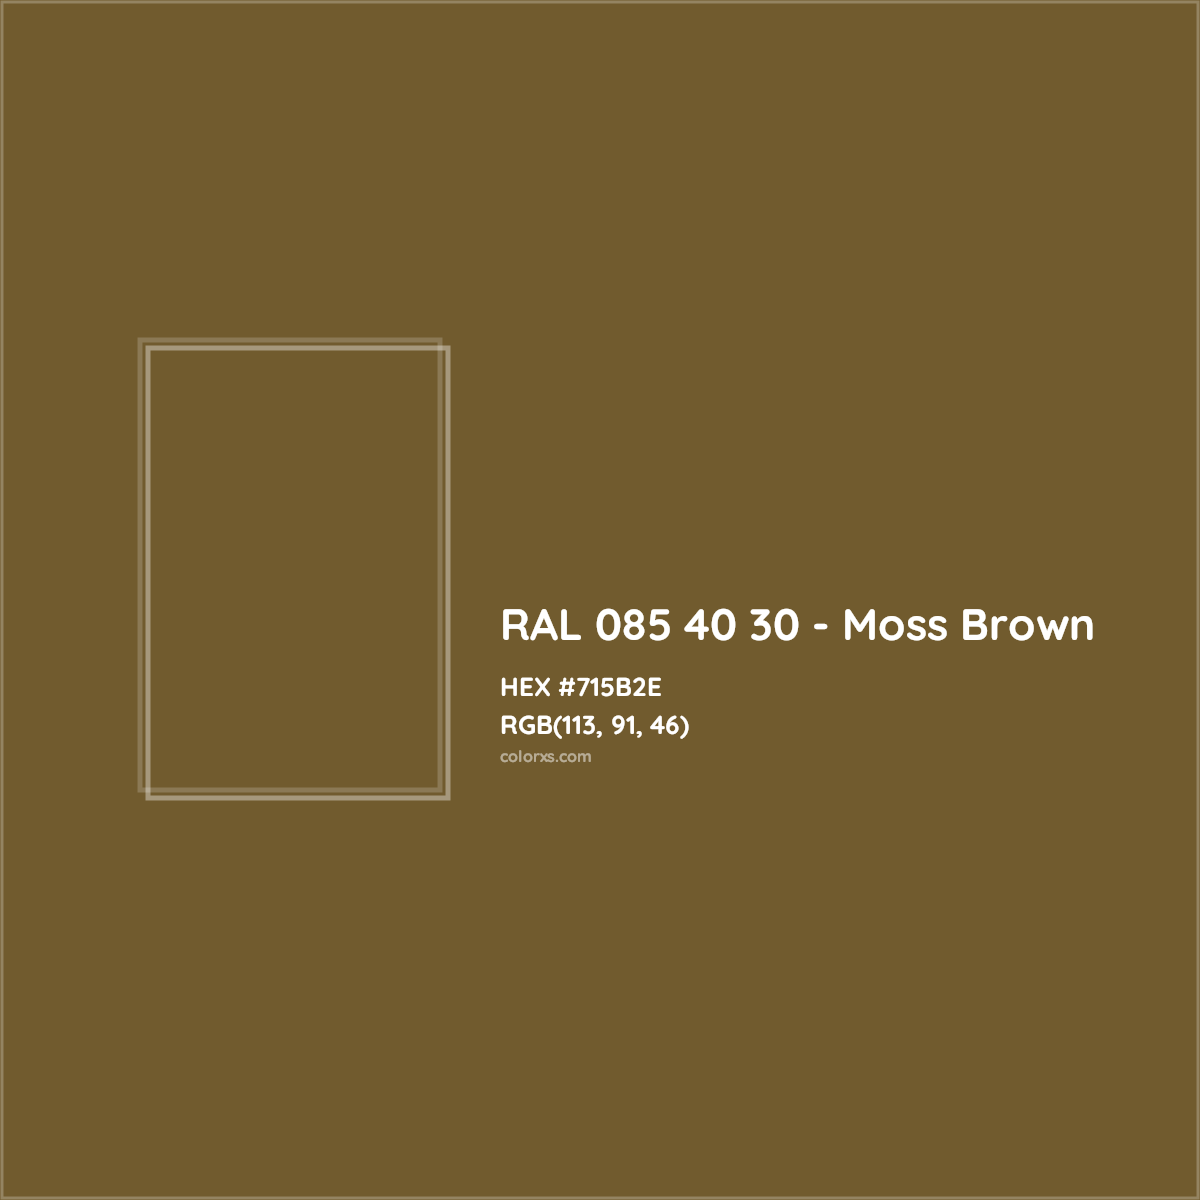 HEX #715B2E RAL 085 40 30 - Moss Brown CMS RAL Design - Color Code